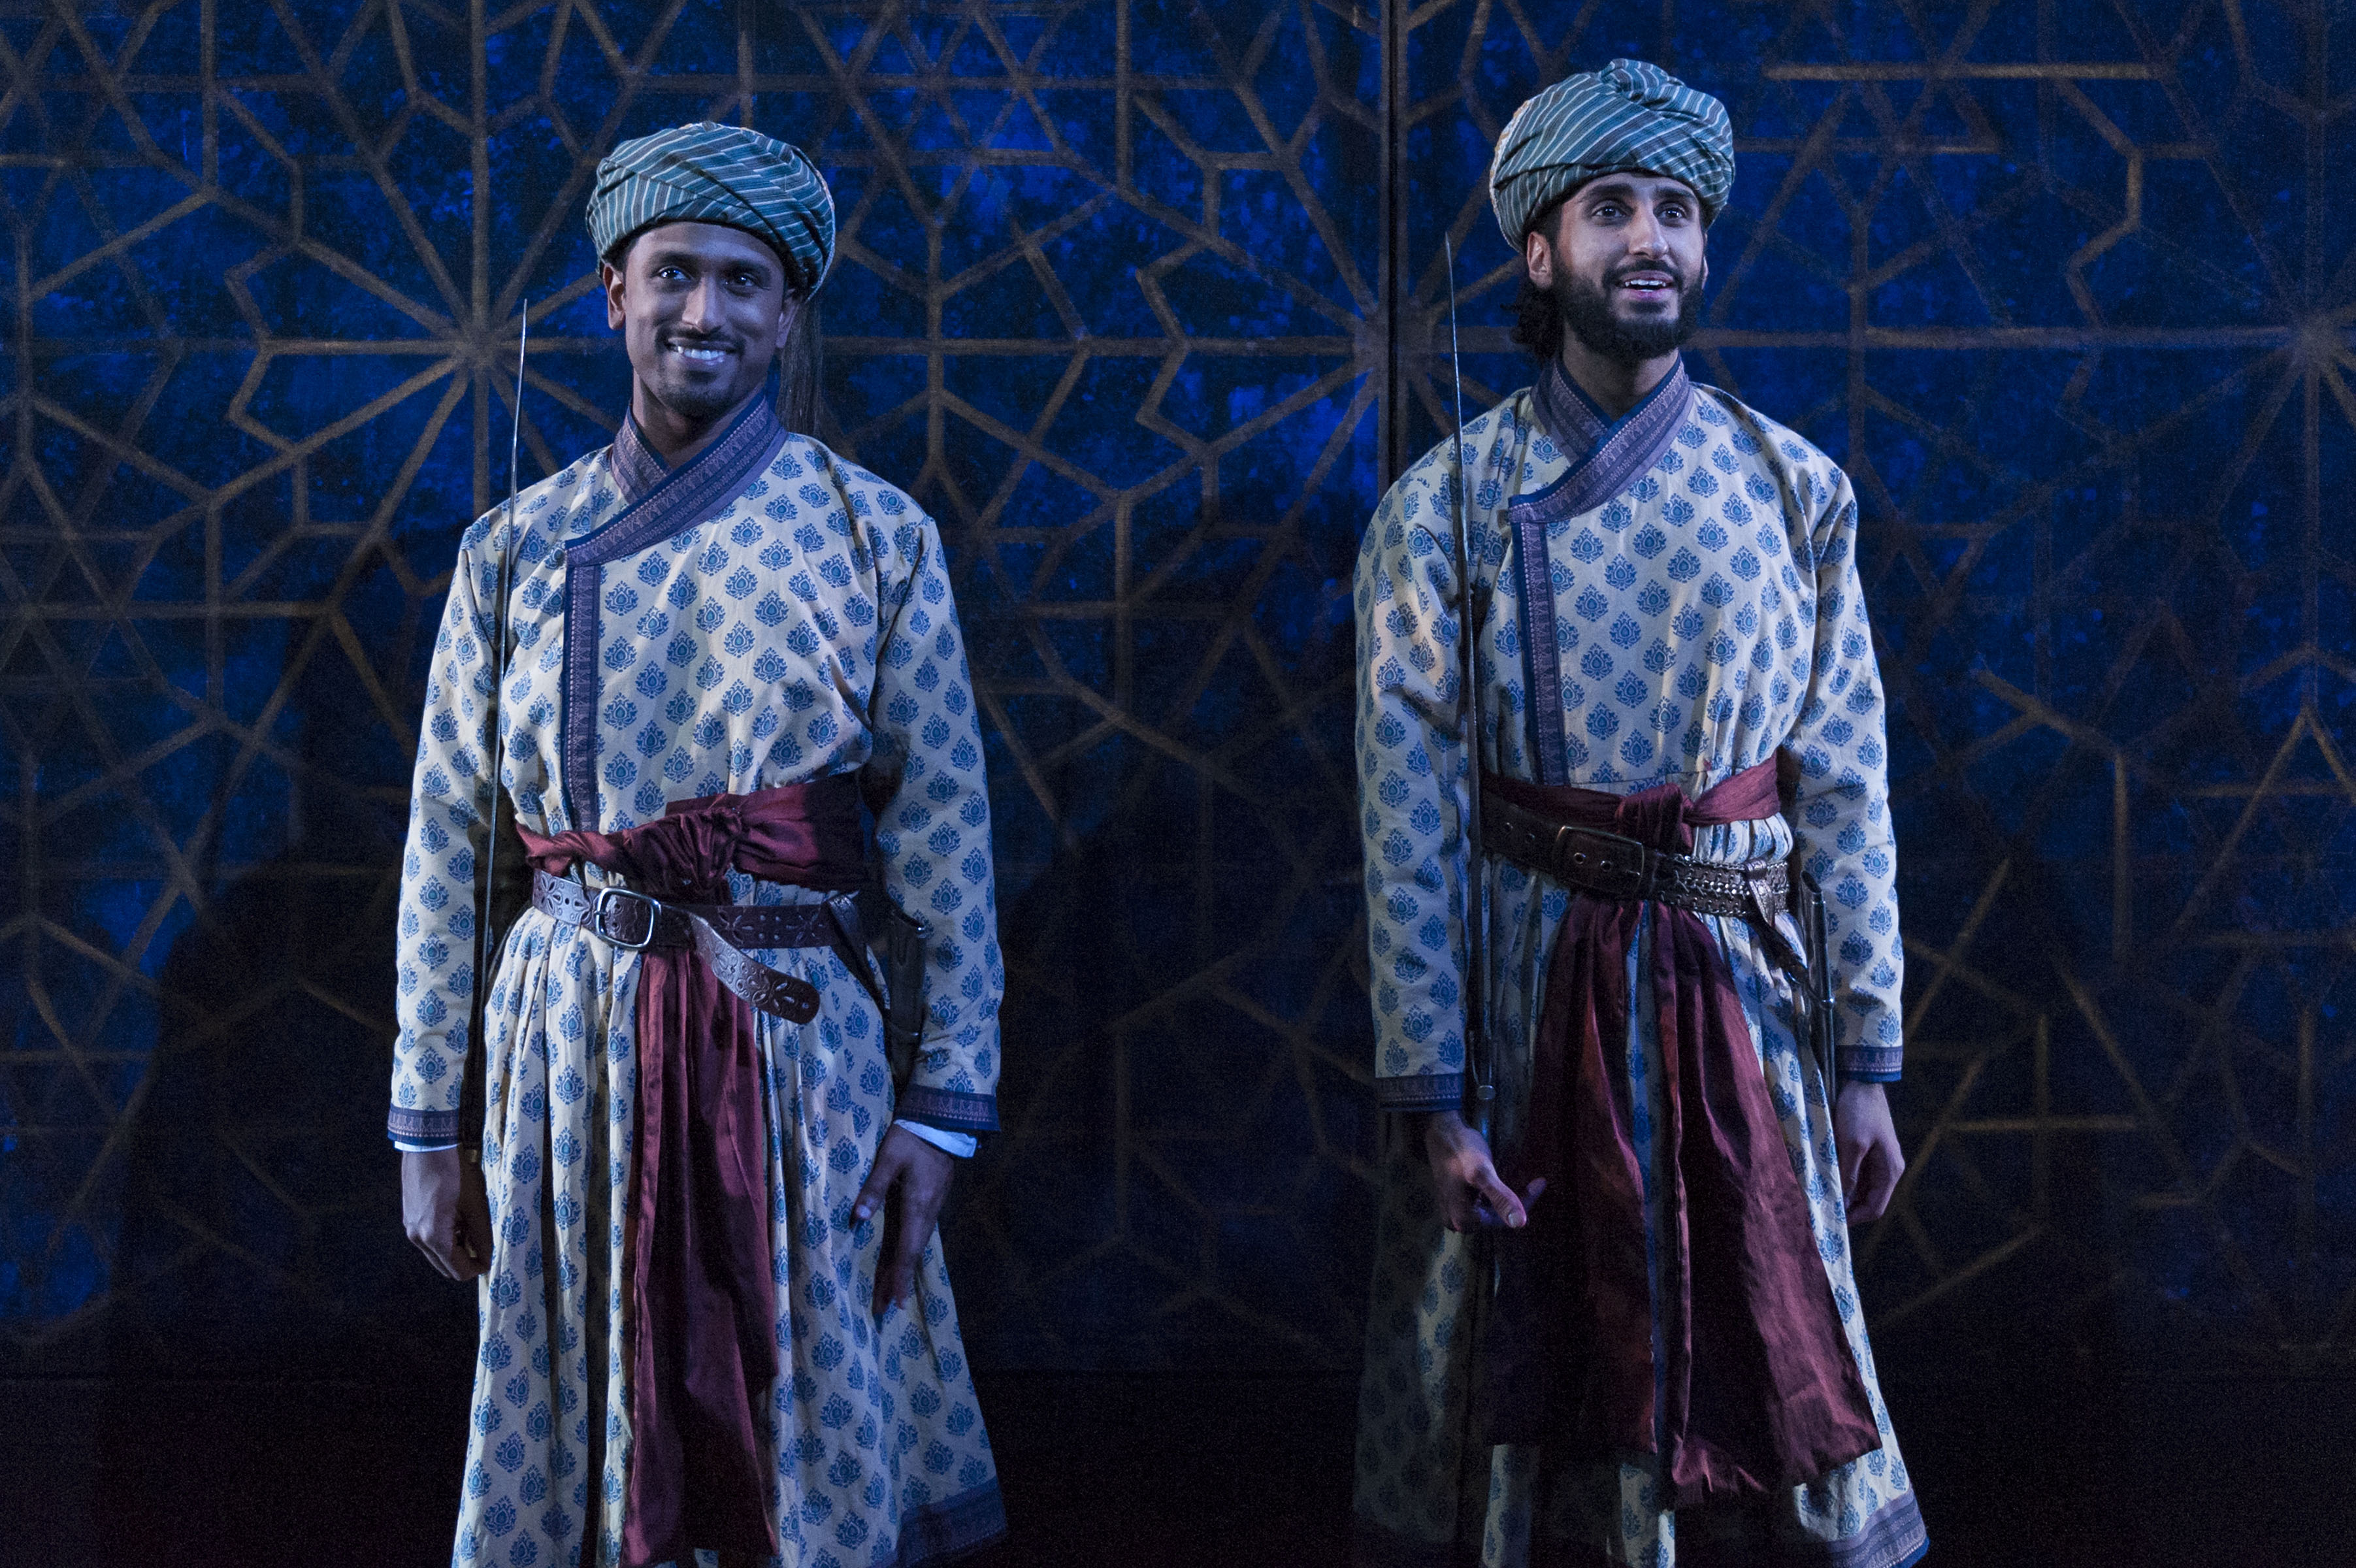 Jacob Aythal & Harsh J. Gagoomal in <strong><em>Guards at the Taj</em></strong>. Photo: A.R. Sinclair Photography.